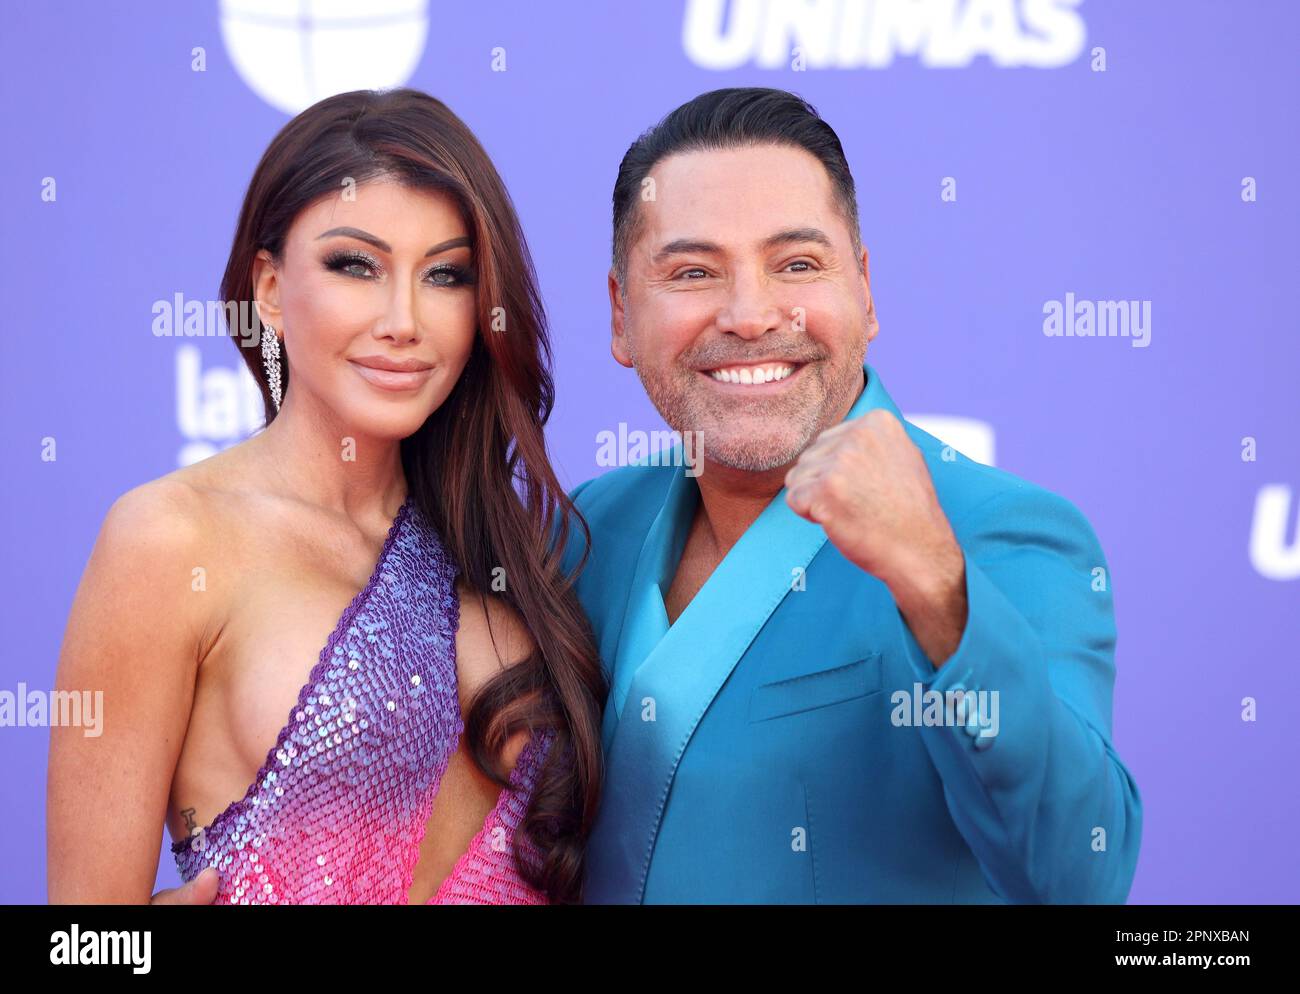 las-vegas-united-states-20th-apr-2023-l-r-holly-sonders-and-oscar-de-la-hoya-attend-the-8th-annual-latin-american-music-awards-at-the-mgm-grand-garden-arena-in-las-vegas-on-thursday-april-20-2023-the-annual-event-honors-outstanding-achievements-for-artists-in-the-latin-music-industry-photo-by-james-atoaupi-credit-upialamy-live-news-2PNXBAN.jpg